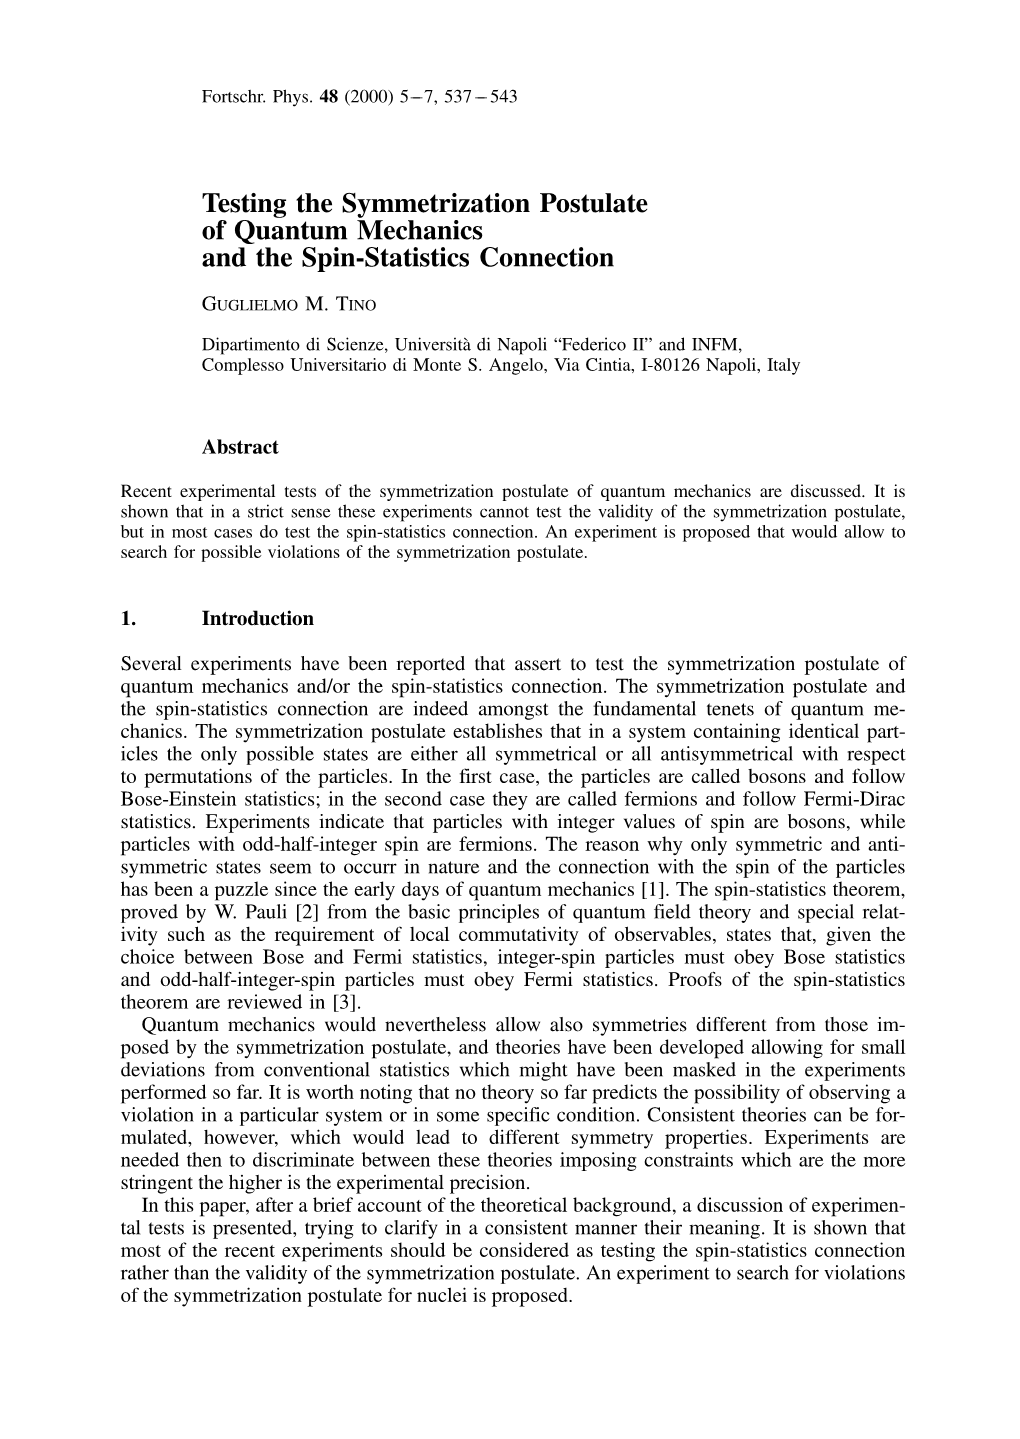 Testing the Symmetrization Postulate of Quantum Mechanics and the Spin-Statistics Connection